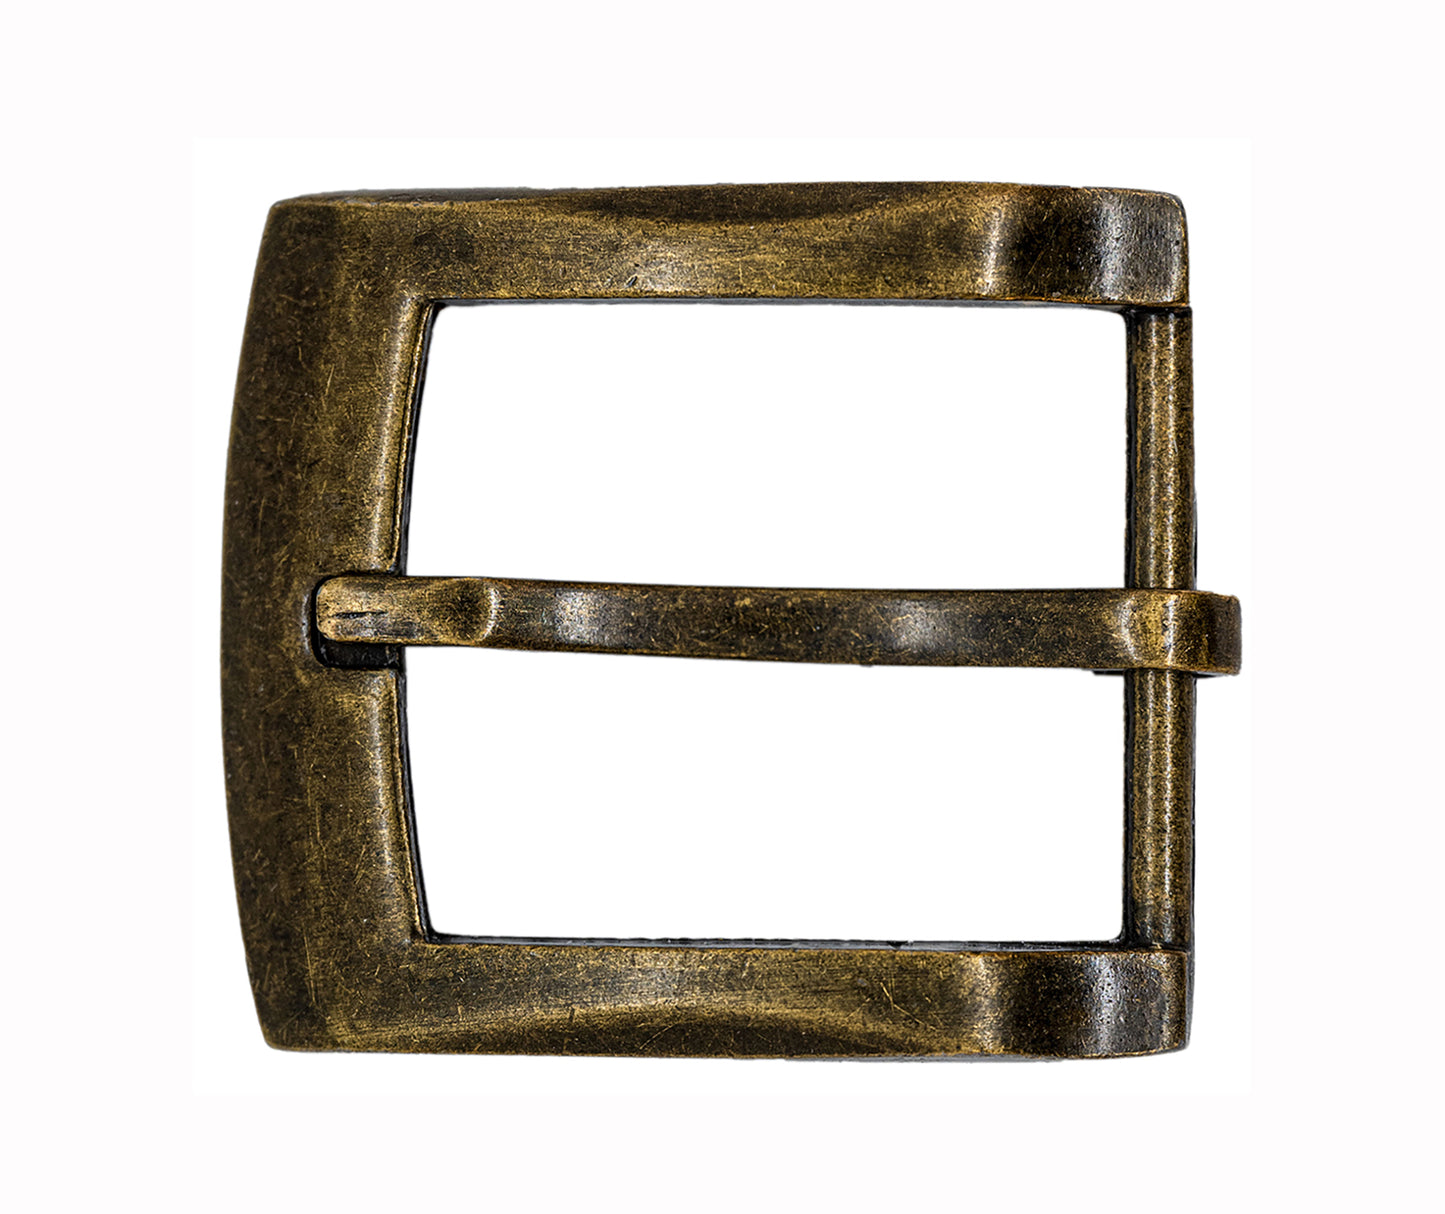 TBS-P5010 - Bronze Finish Pin Buckle for 1 1/2" Belts